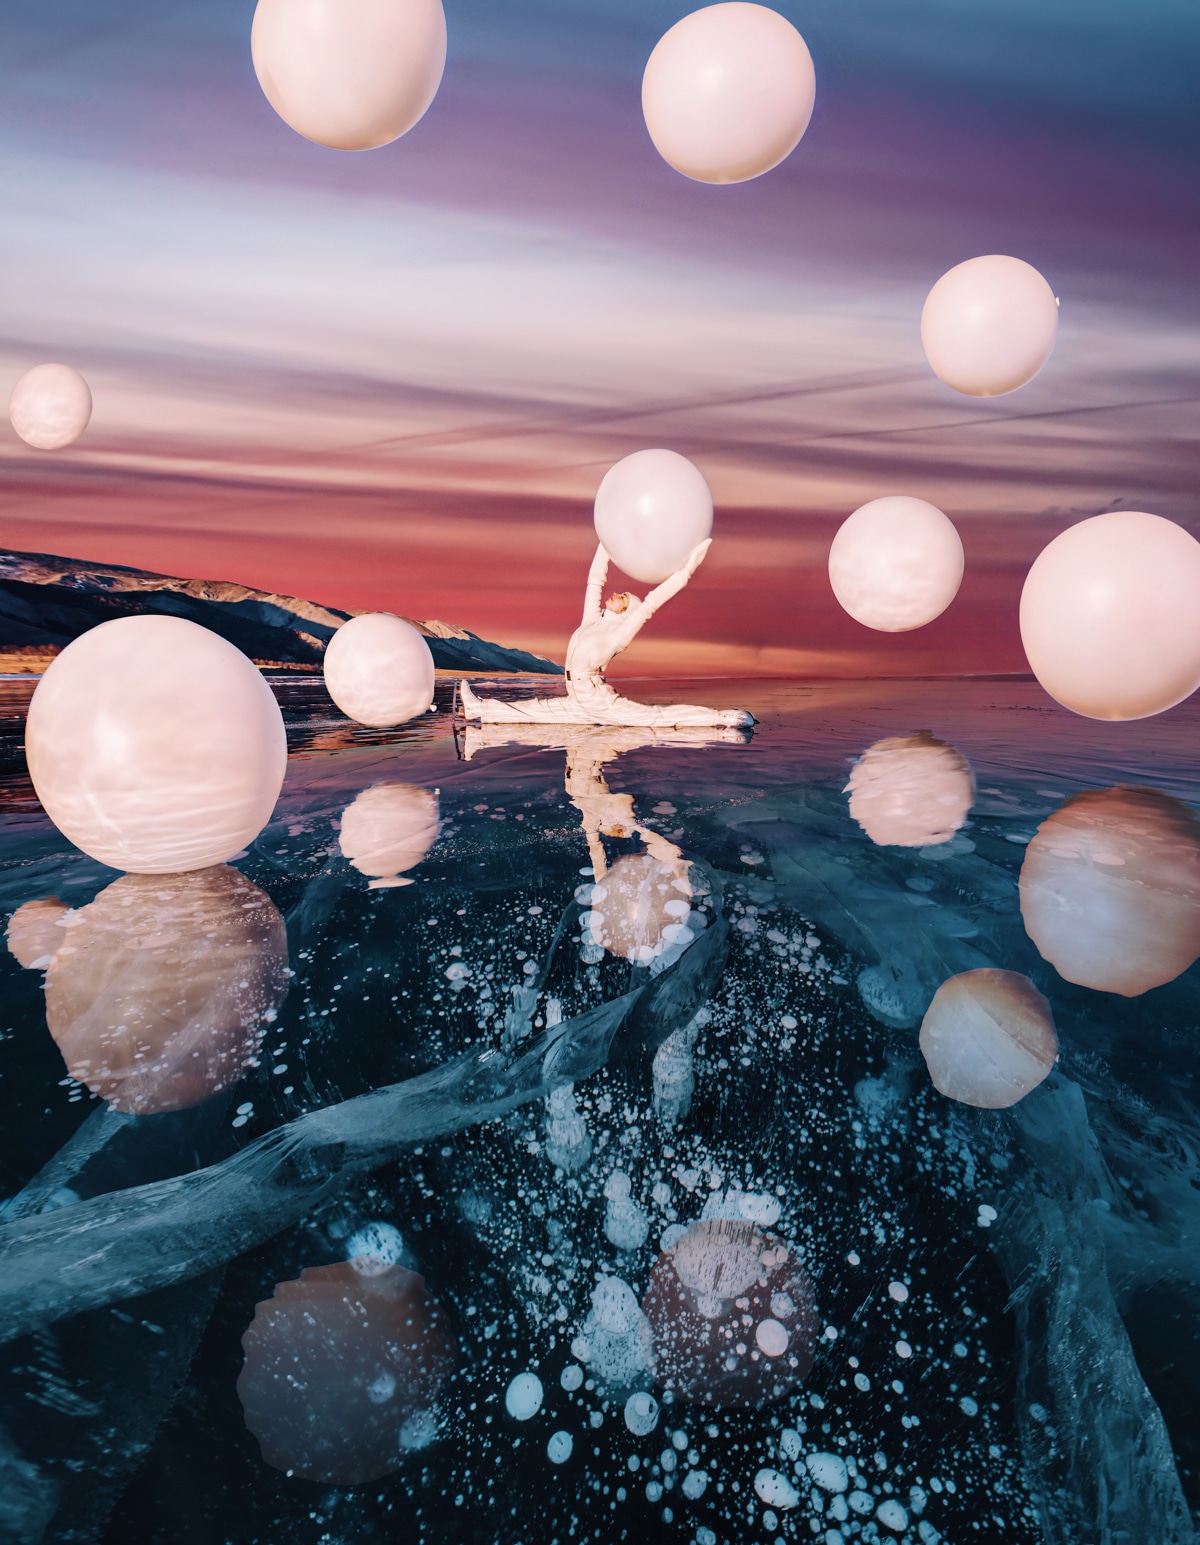 Man In Lake With Sphere Artistic Wallpapers